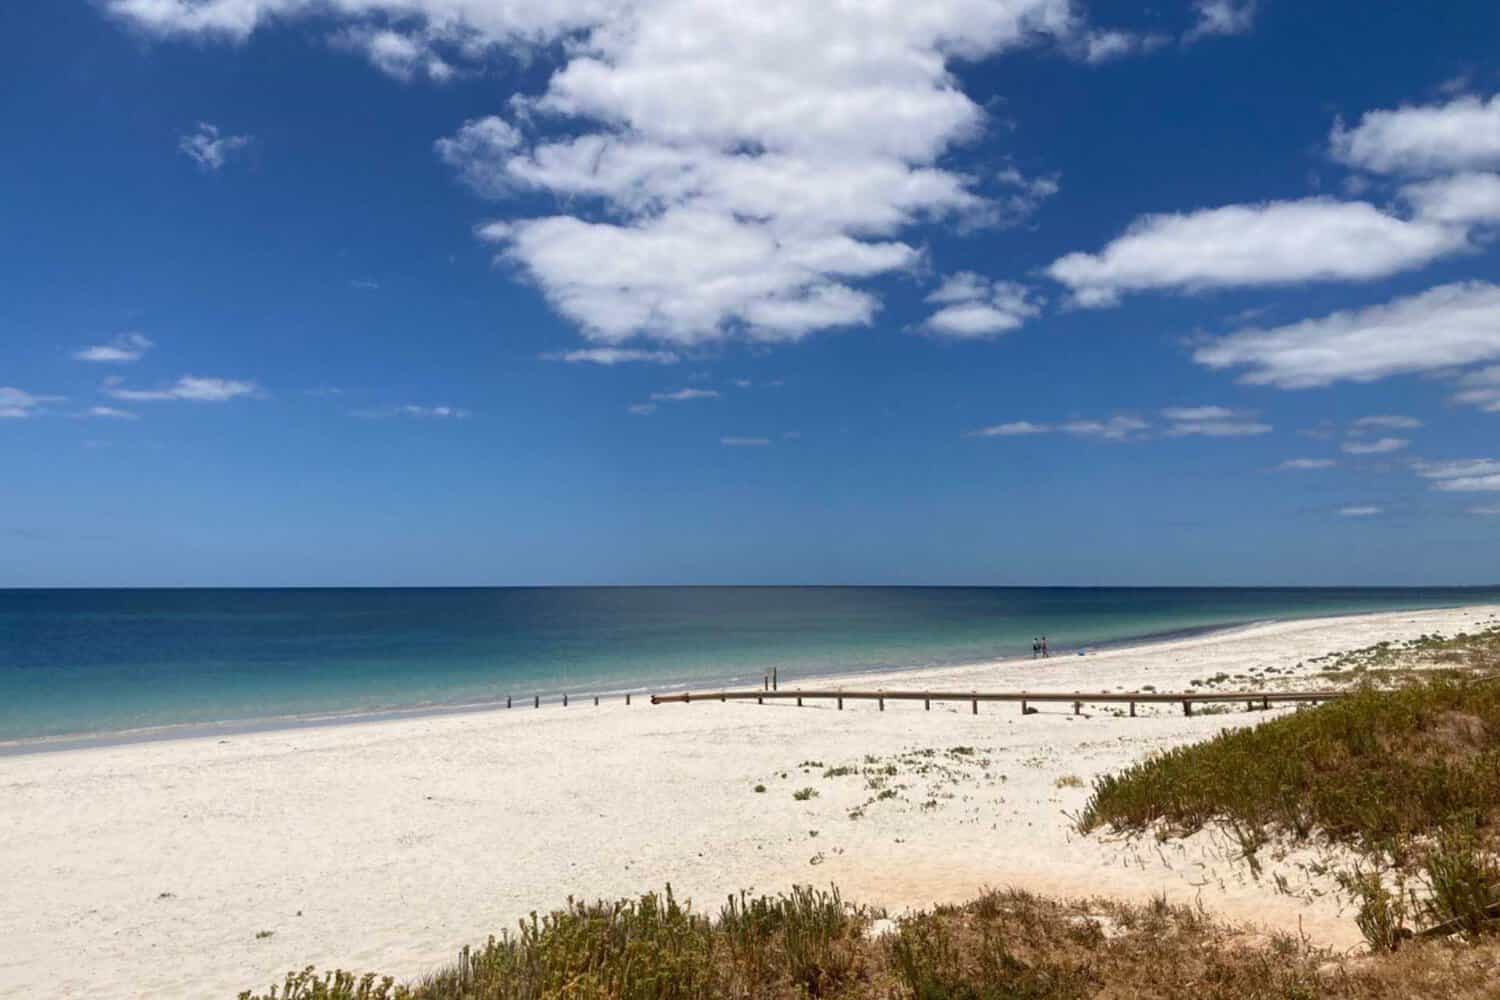 Scenic image of Forrest Beach with Australian bush bordering the pristine shoreline, turquoise ocean waves gently rolling in, under a blue sky.